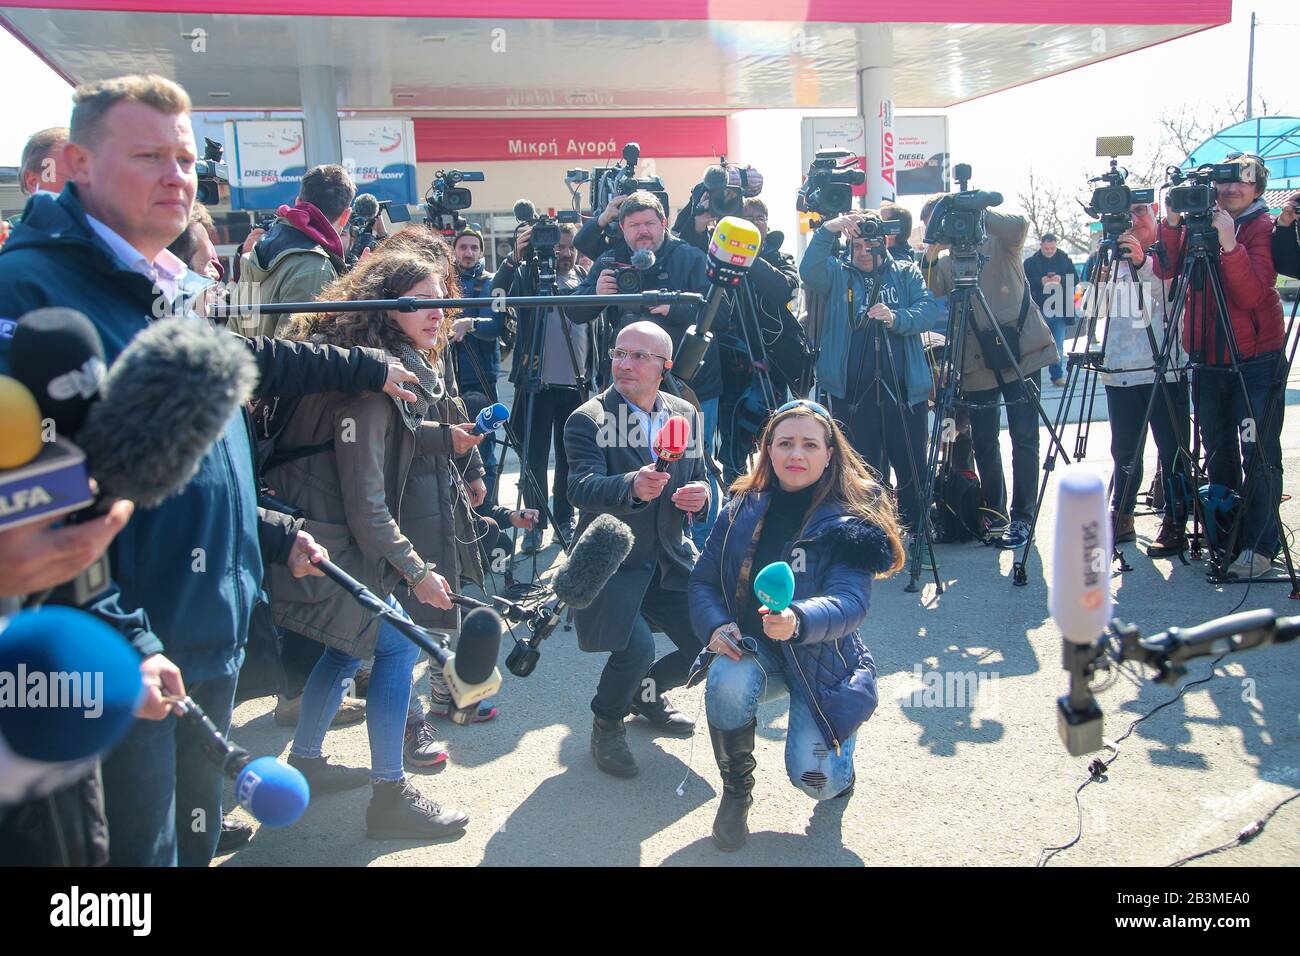 Kastanies, Evros, Greece - March 1, 2020: journalists, television crews and photojournalism from all over the world have gathered at the Greek-Turkish Stock Photo